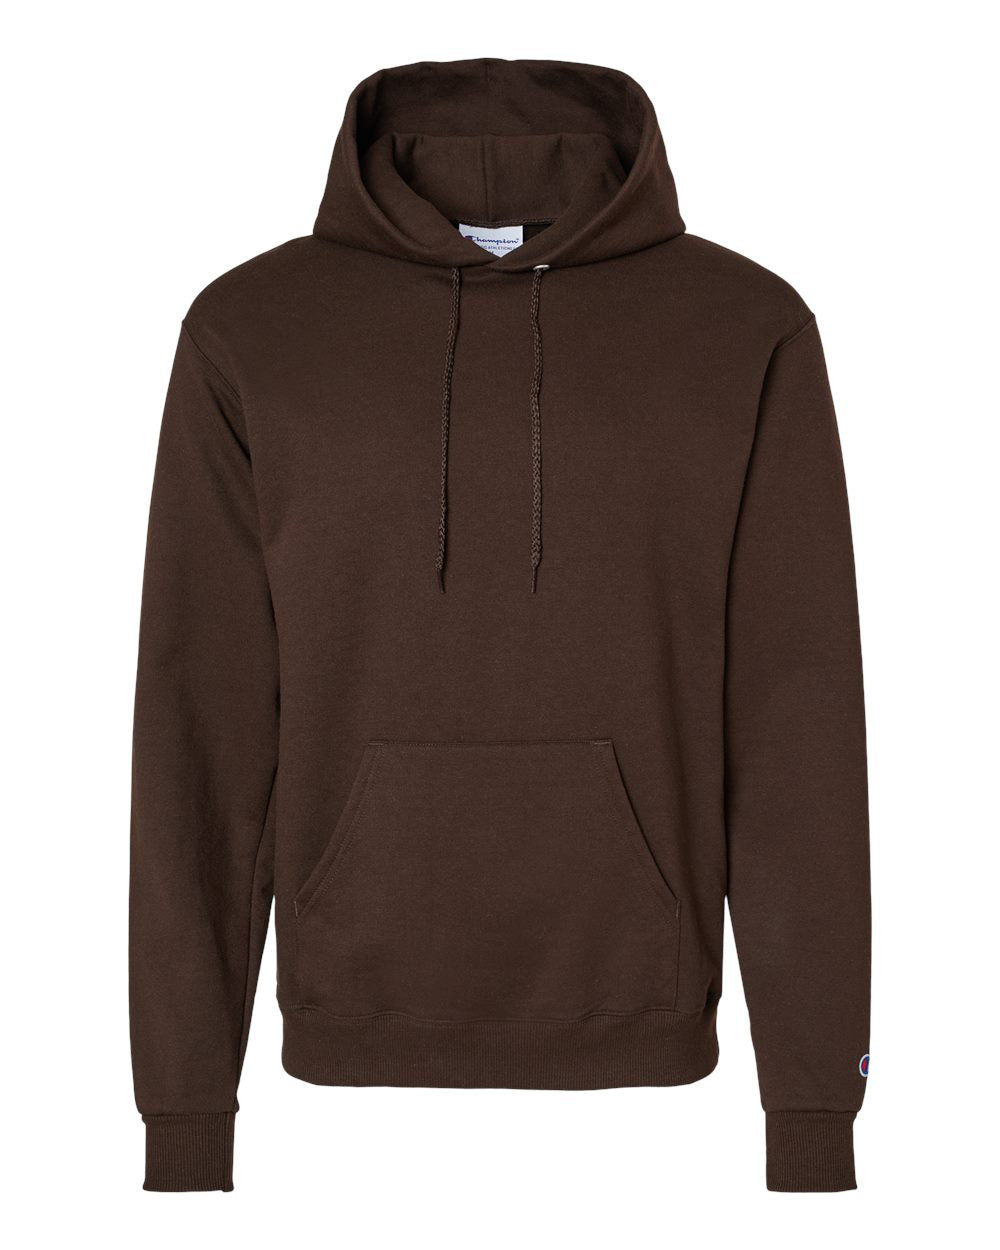 Champion Hoodie S700 in Chocolate Brown